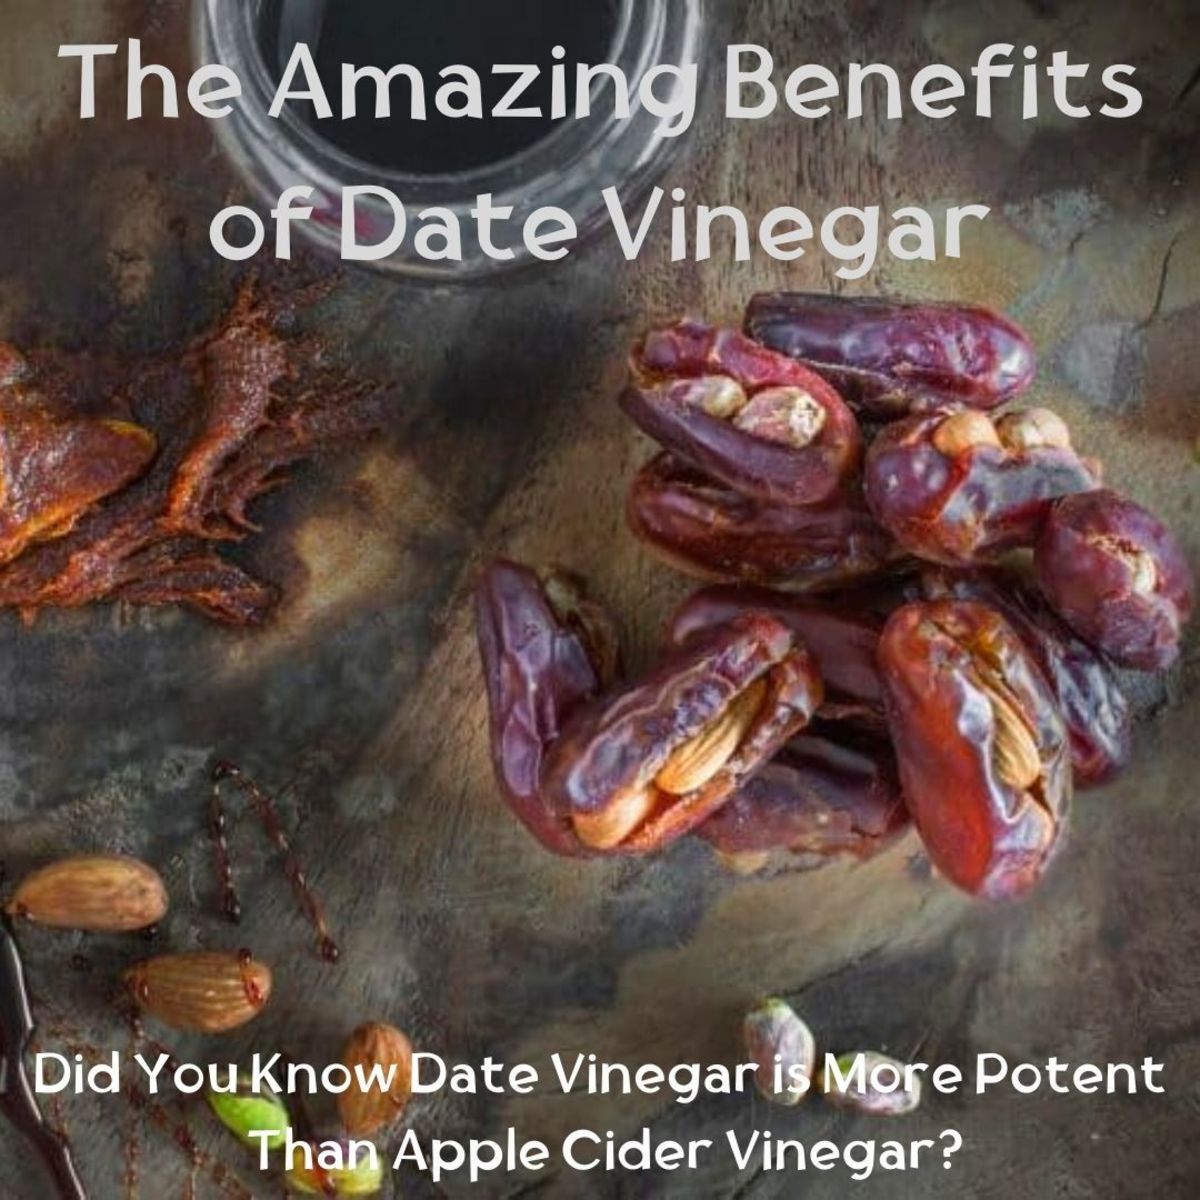 Date vinegar, one of the popular Middle Eastern food products, is loaded with various vitamins, antioxidant properties, etc. has antibacterial properties to relieve sore throat, lose weight, etc. and  is better than apple cider vinegar 